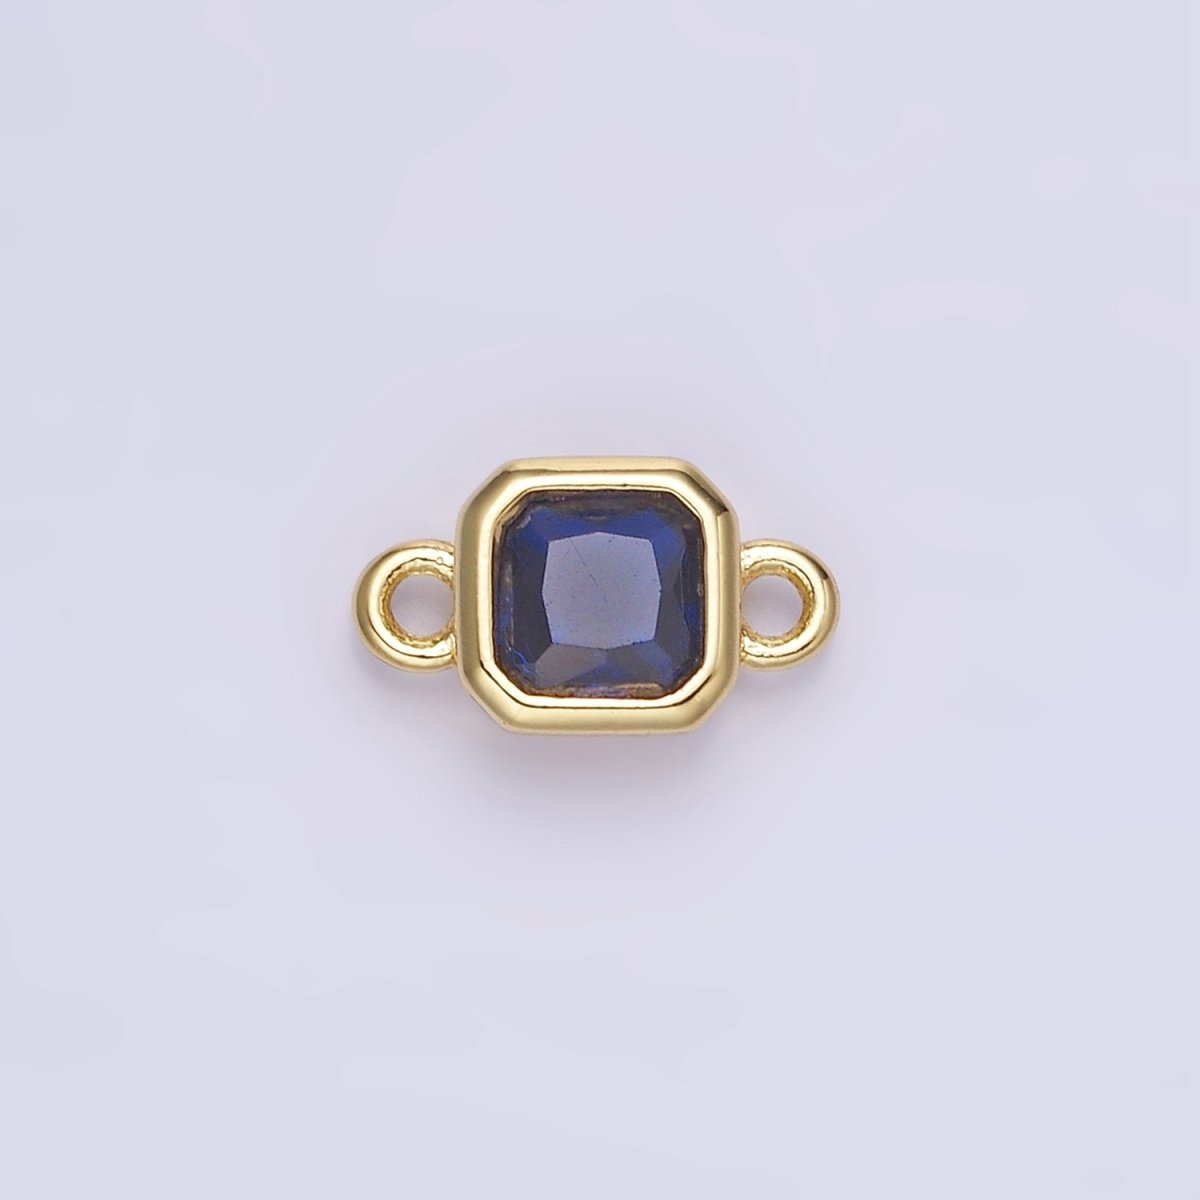 24K Gold Filled Square CZ Edged Bezel Connector in Gold & Silver | G472 - G483 - DLUXCA